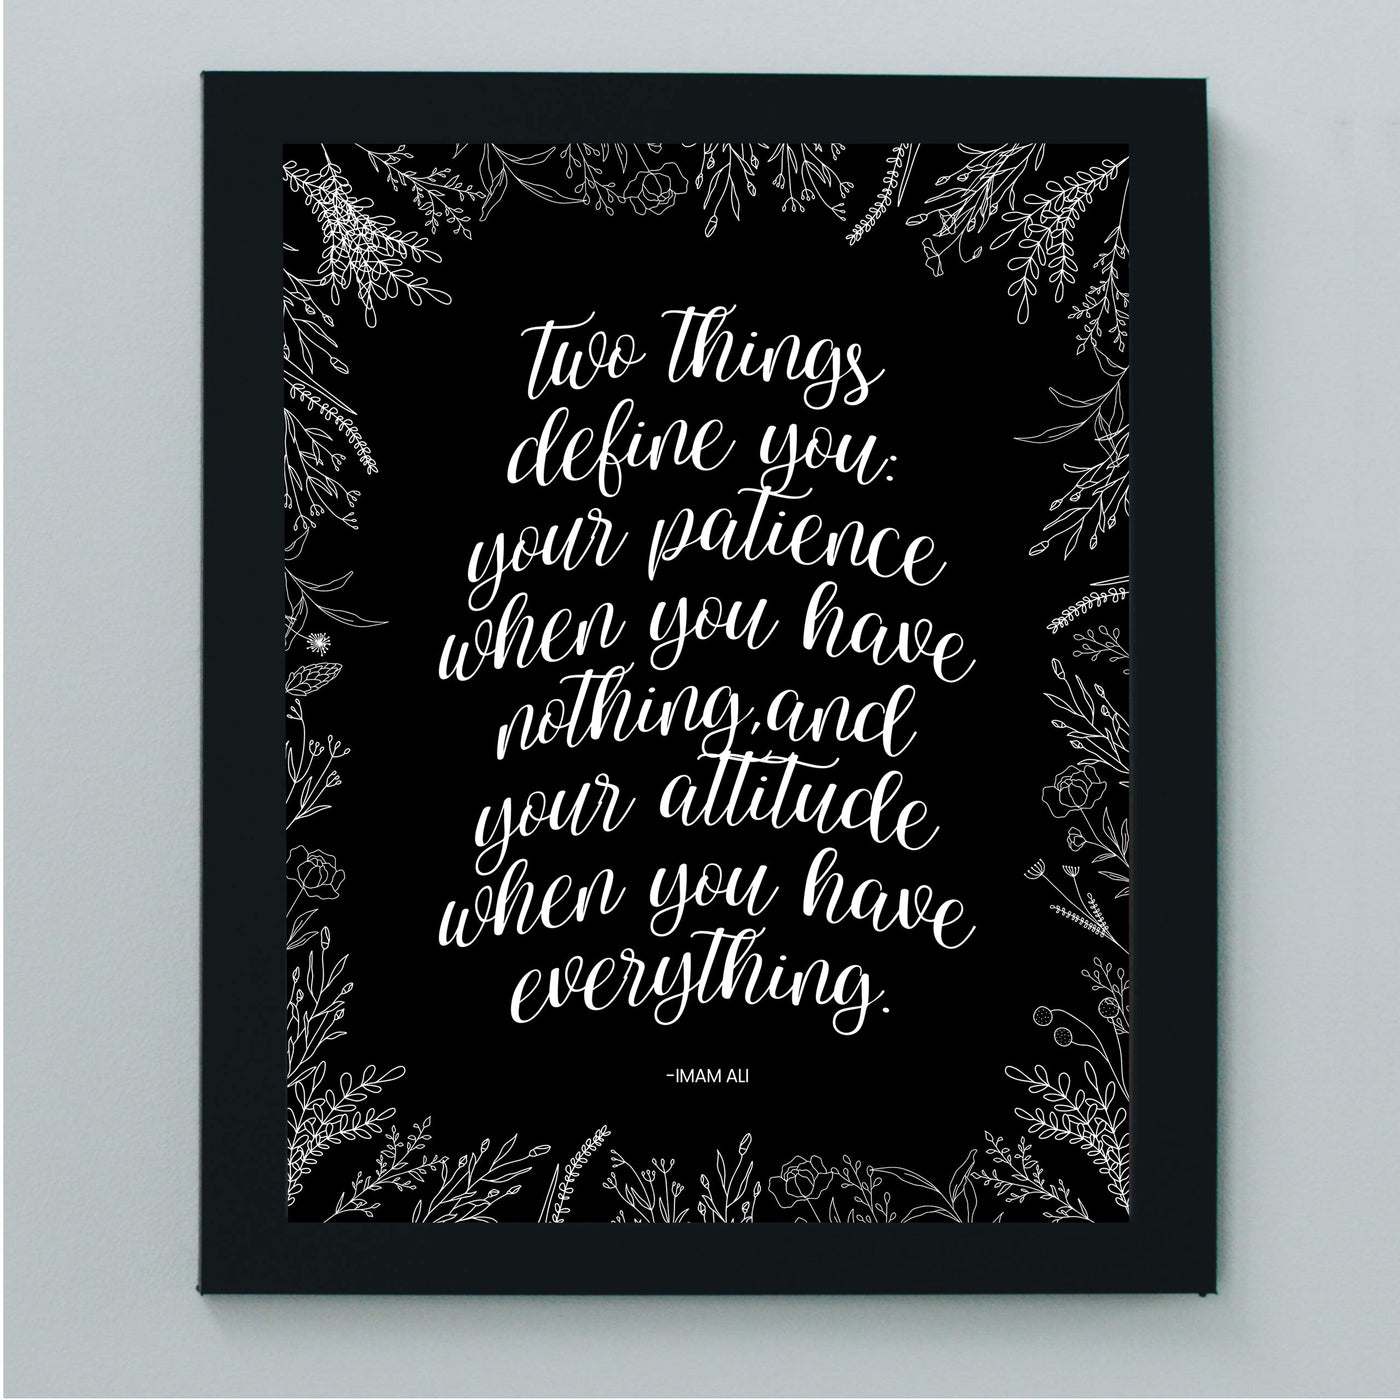 Two Things Define You: Patience-Attitude Inspirational Quotes Wall Sign -8 x 10" Modern Floral Art Print-Ready to Frame. Motivational Home-Office-Studio-School Decor. Great Reminder for All!